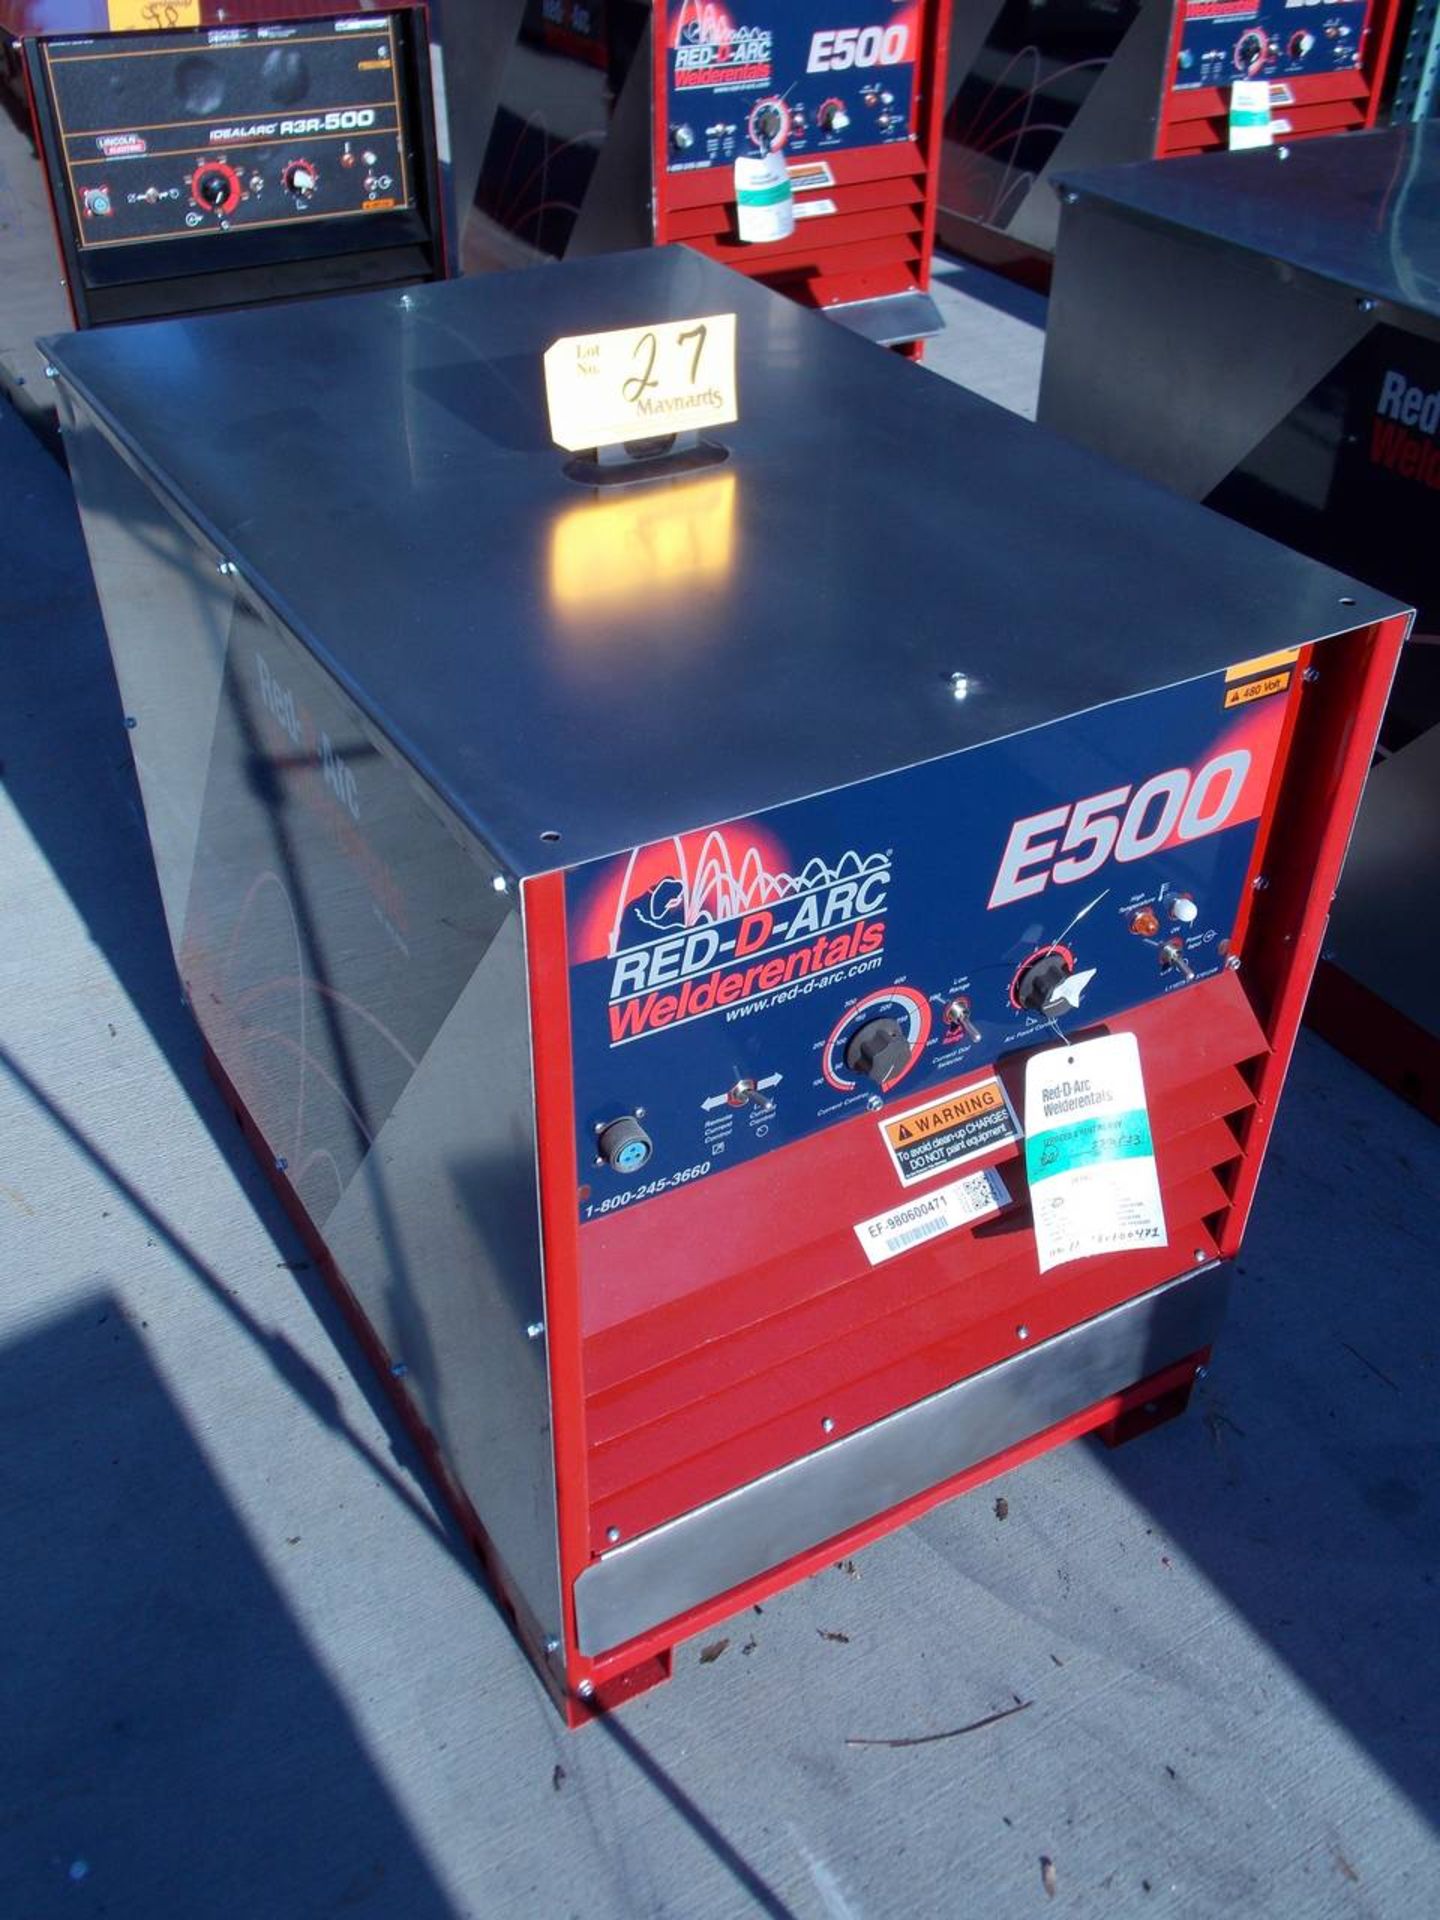 1998 Lincoln Electric RLK1286 E500 electric welder, stainless steel panels (R3R500)